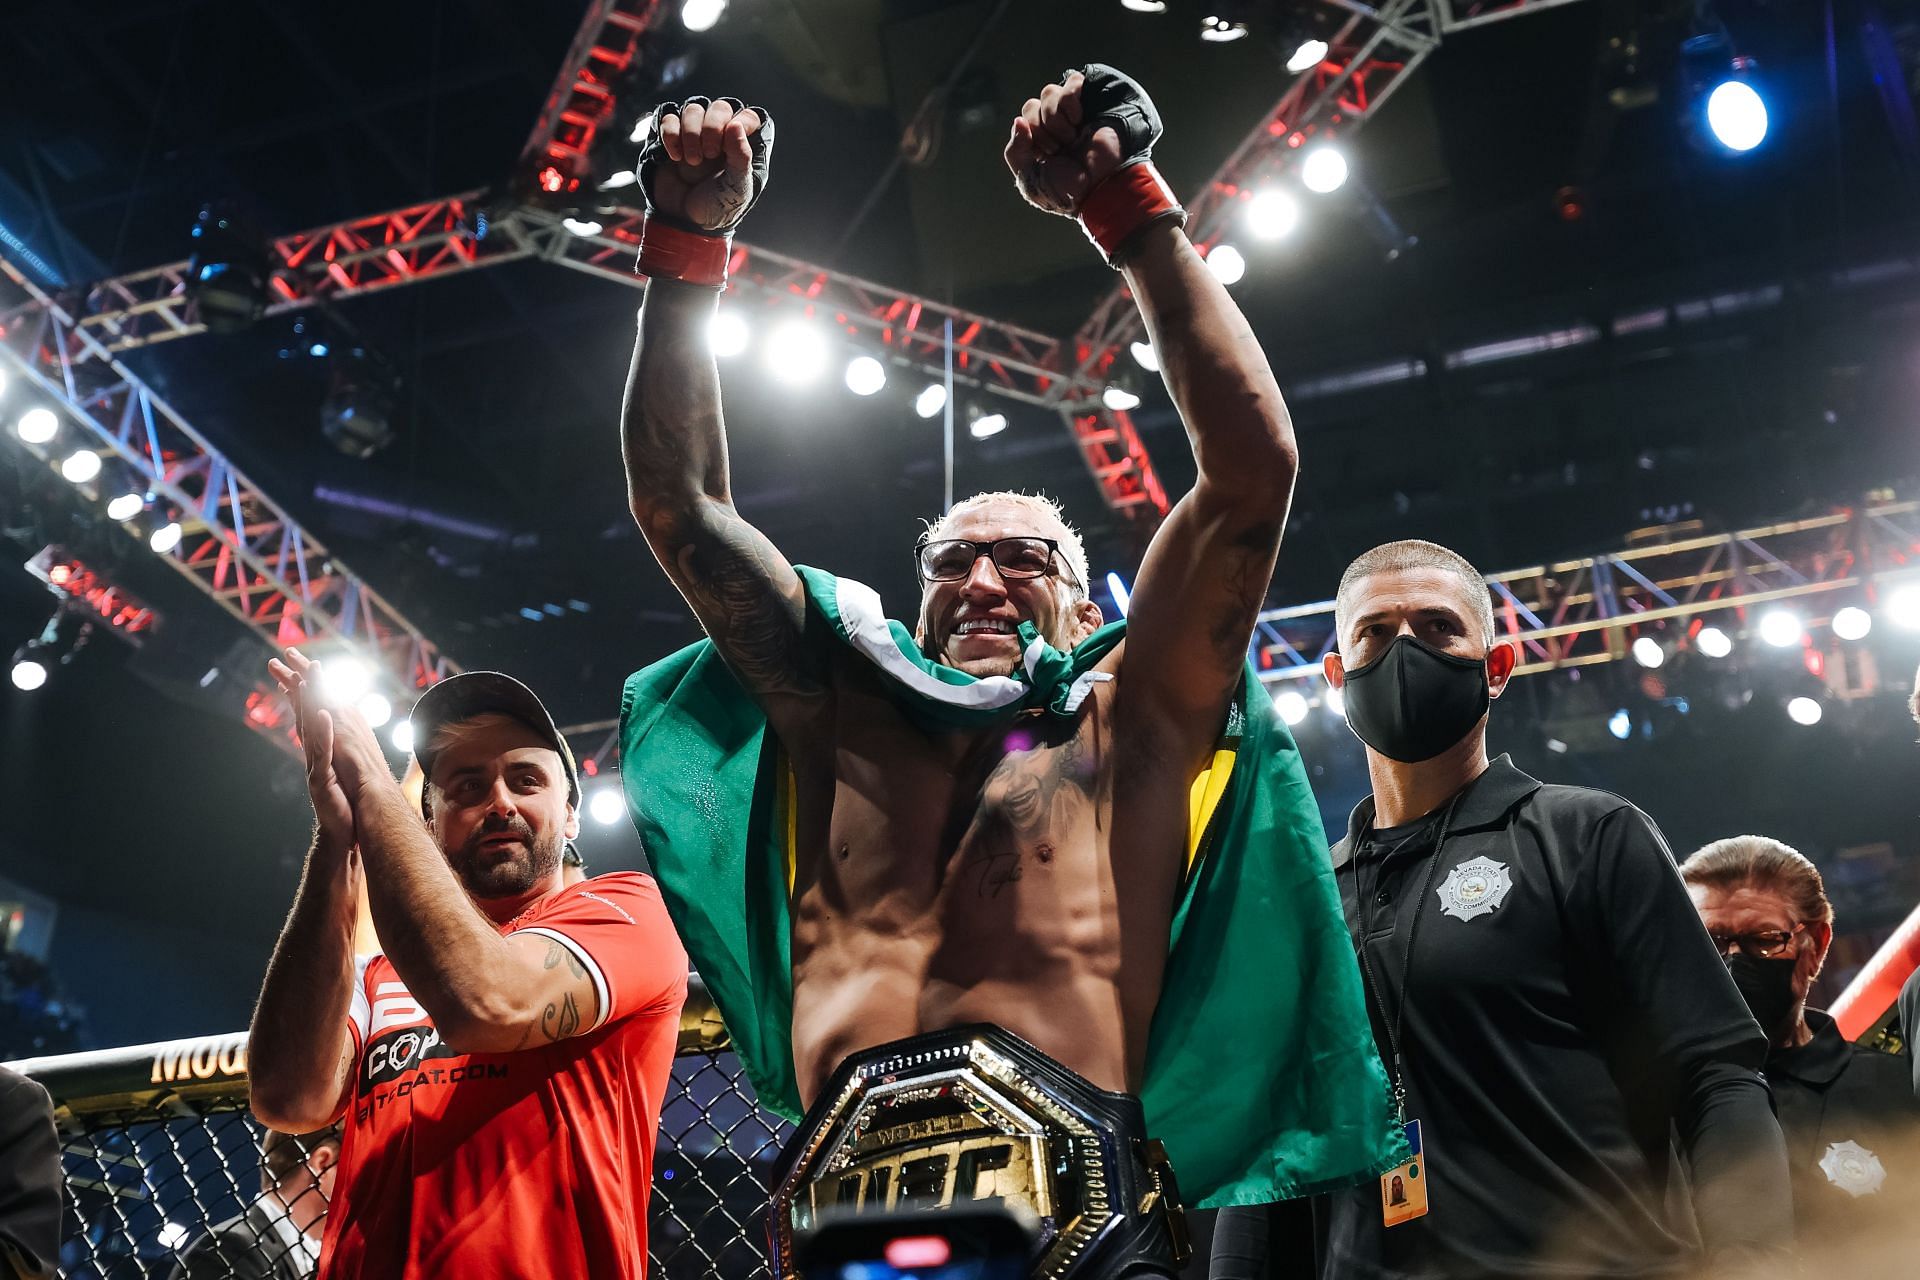 Charles Oliveira proved his doubters wrong by winning the UFC lightweight title after over a decade of fights in the octagon